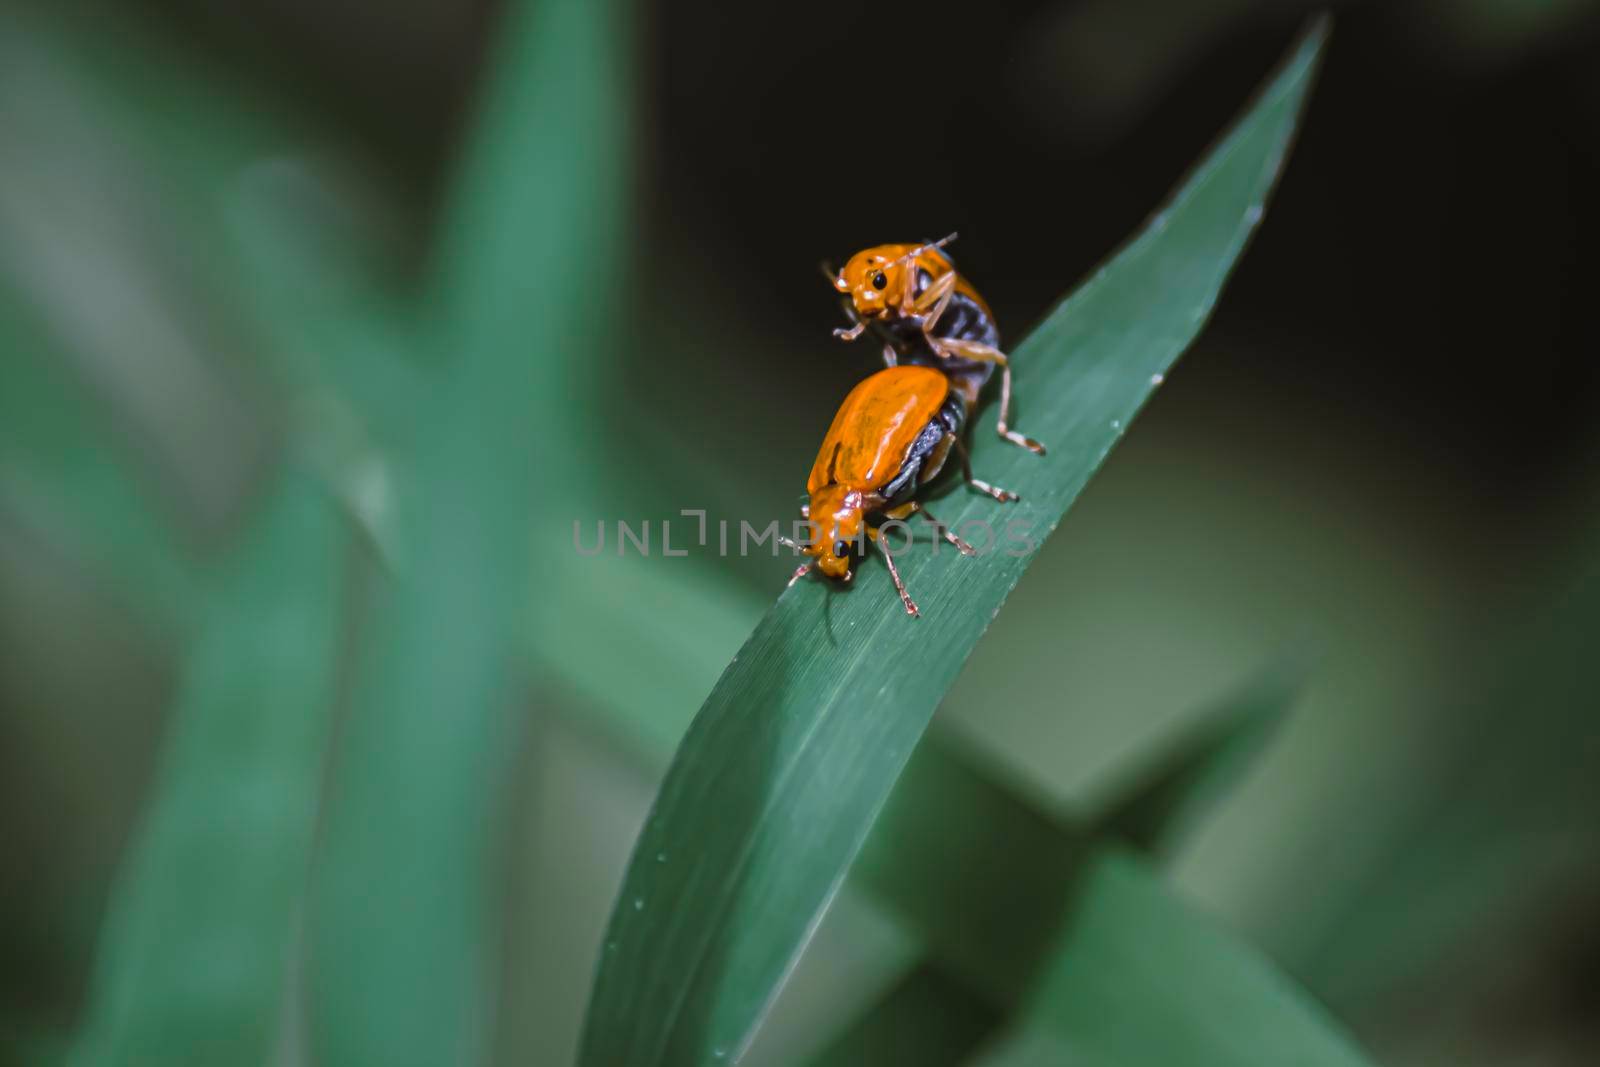 The small ants, lover ants ,relationship concept idea of love and friendship. Close up photography by Petrichor